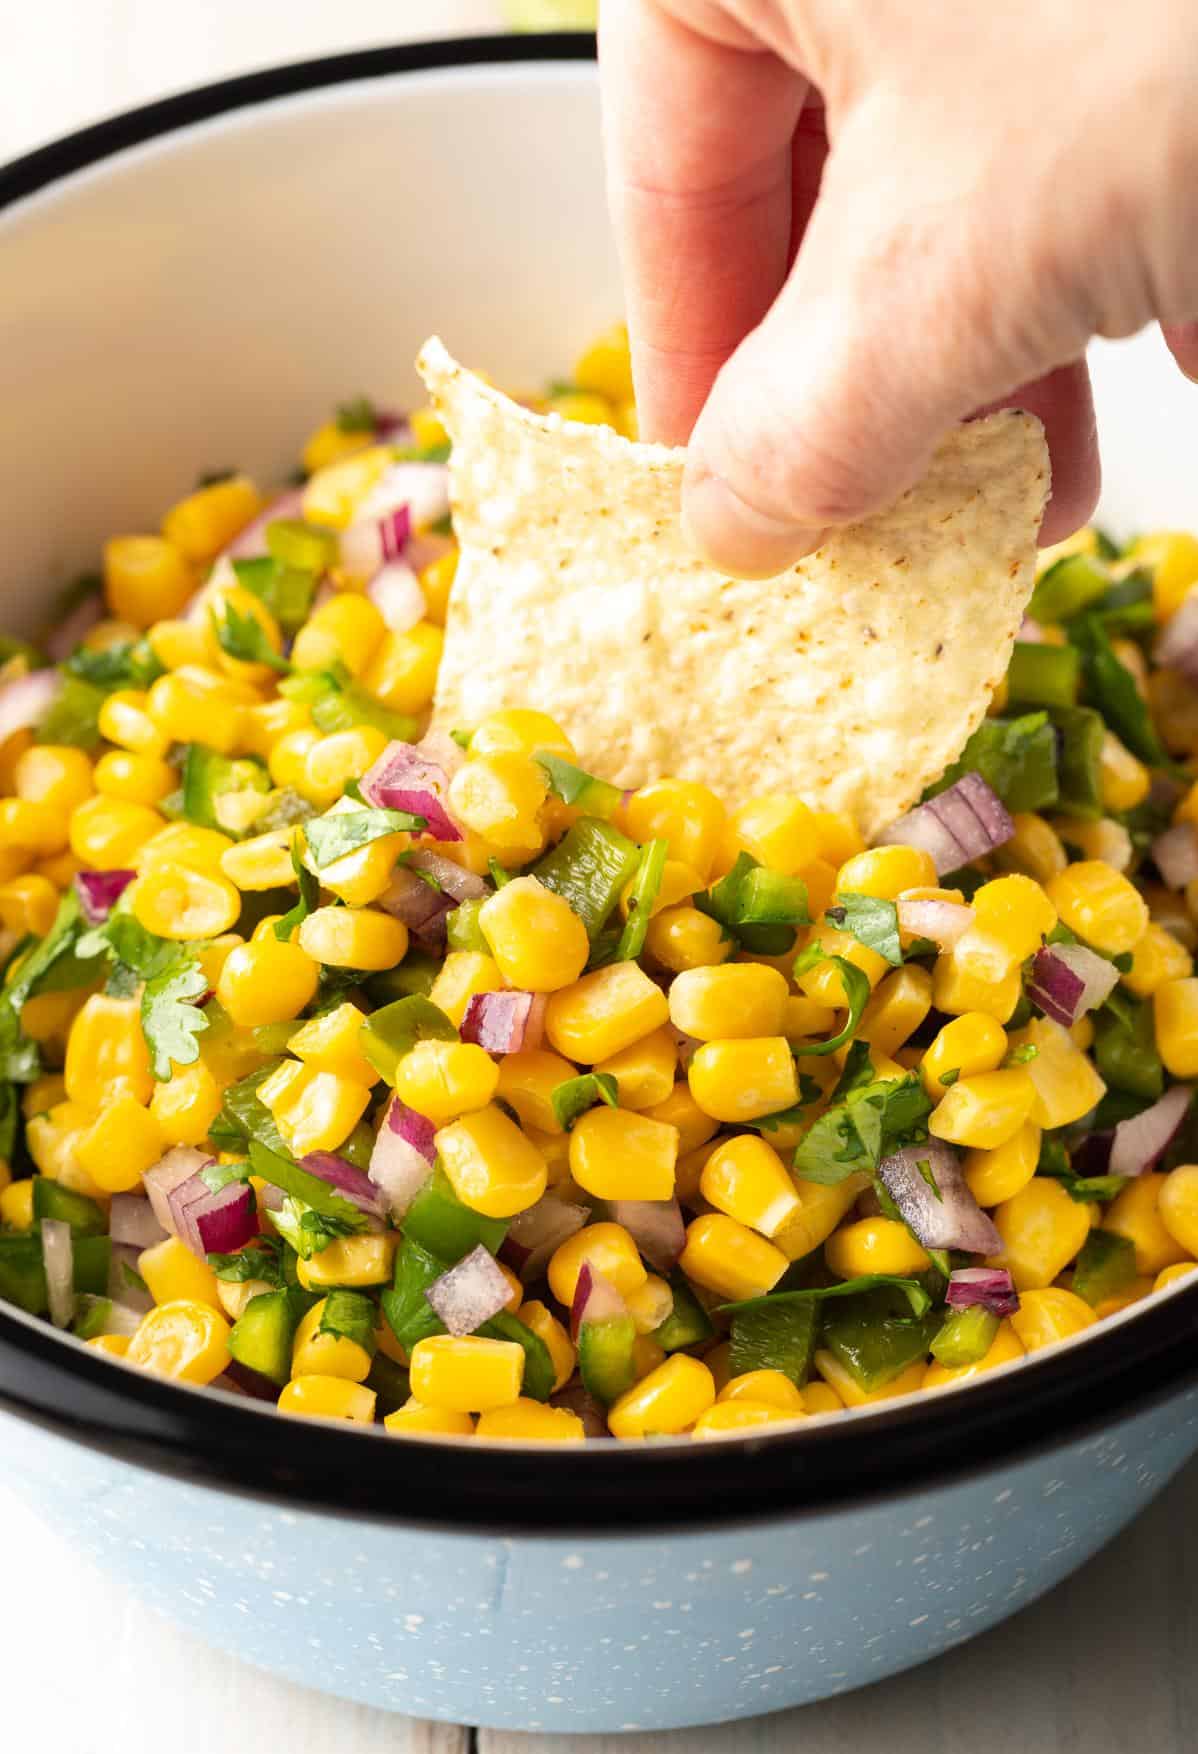 Spice Up Your Meal with Chipotle’s Corn Salsa Recipe